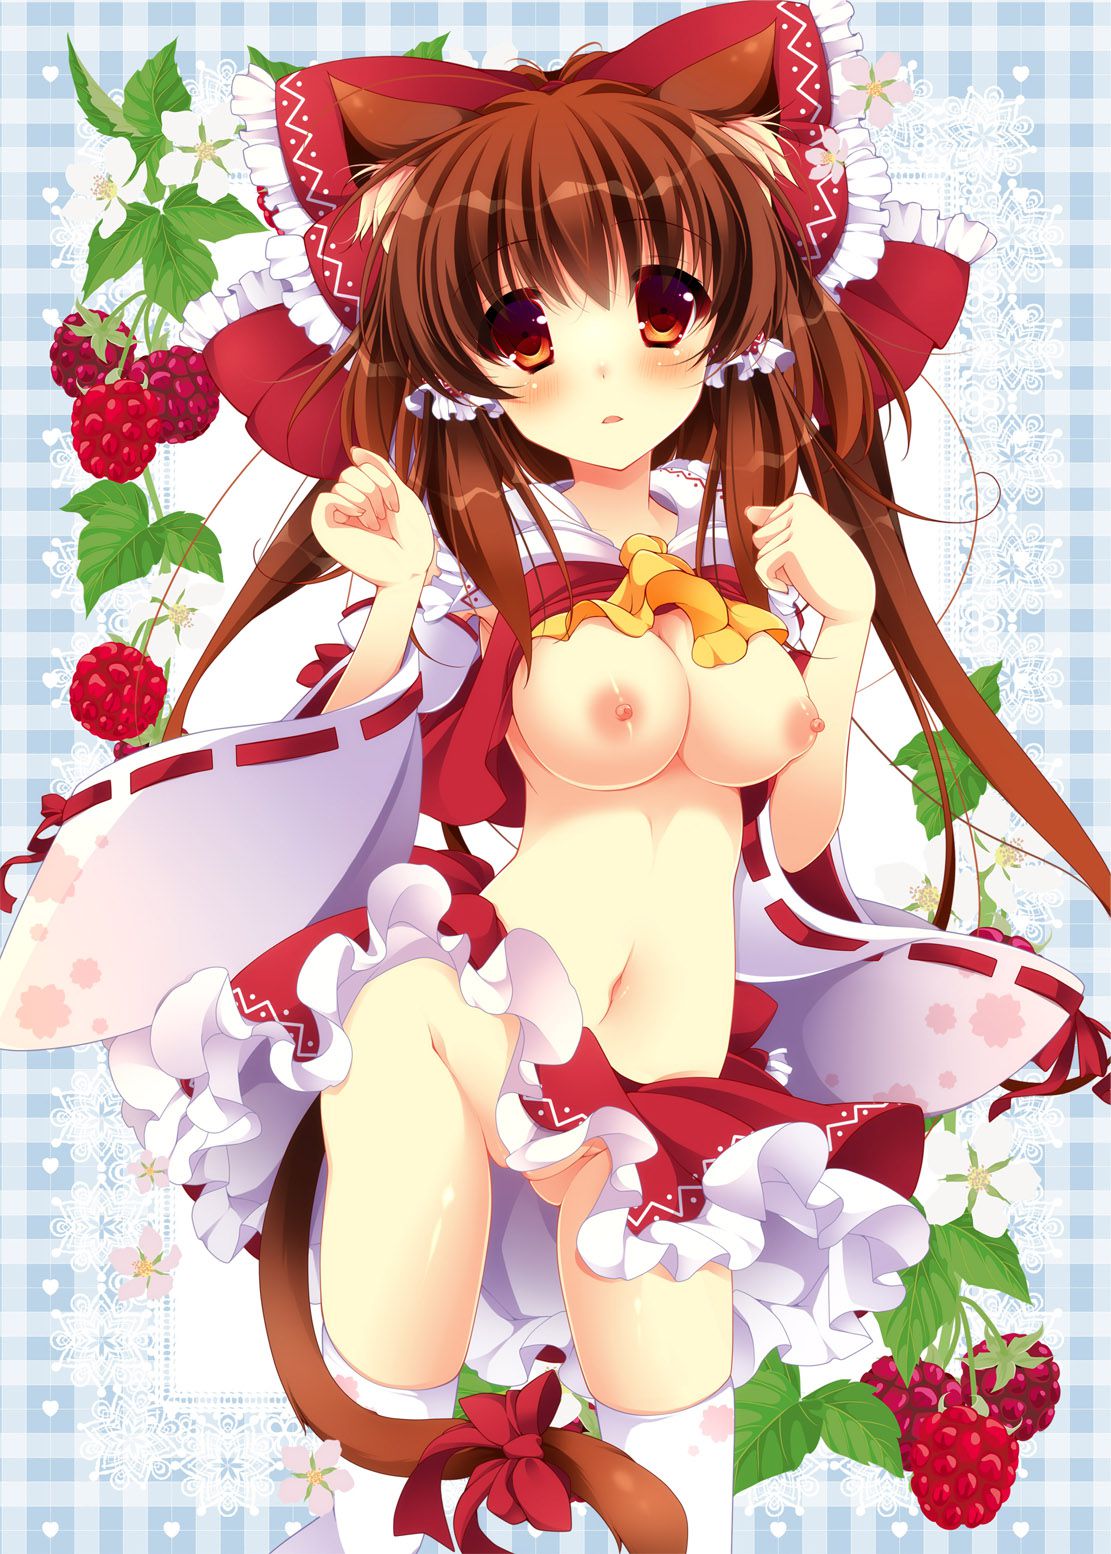 [Touhou Project] I got an obscene image in the nasty of Hakurei Reimu! 2